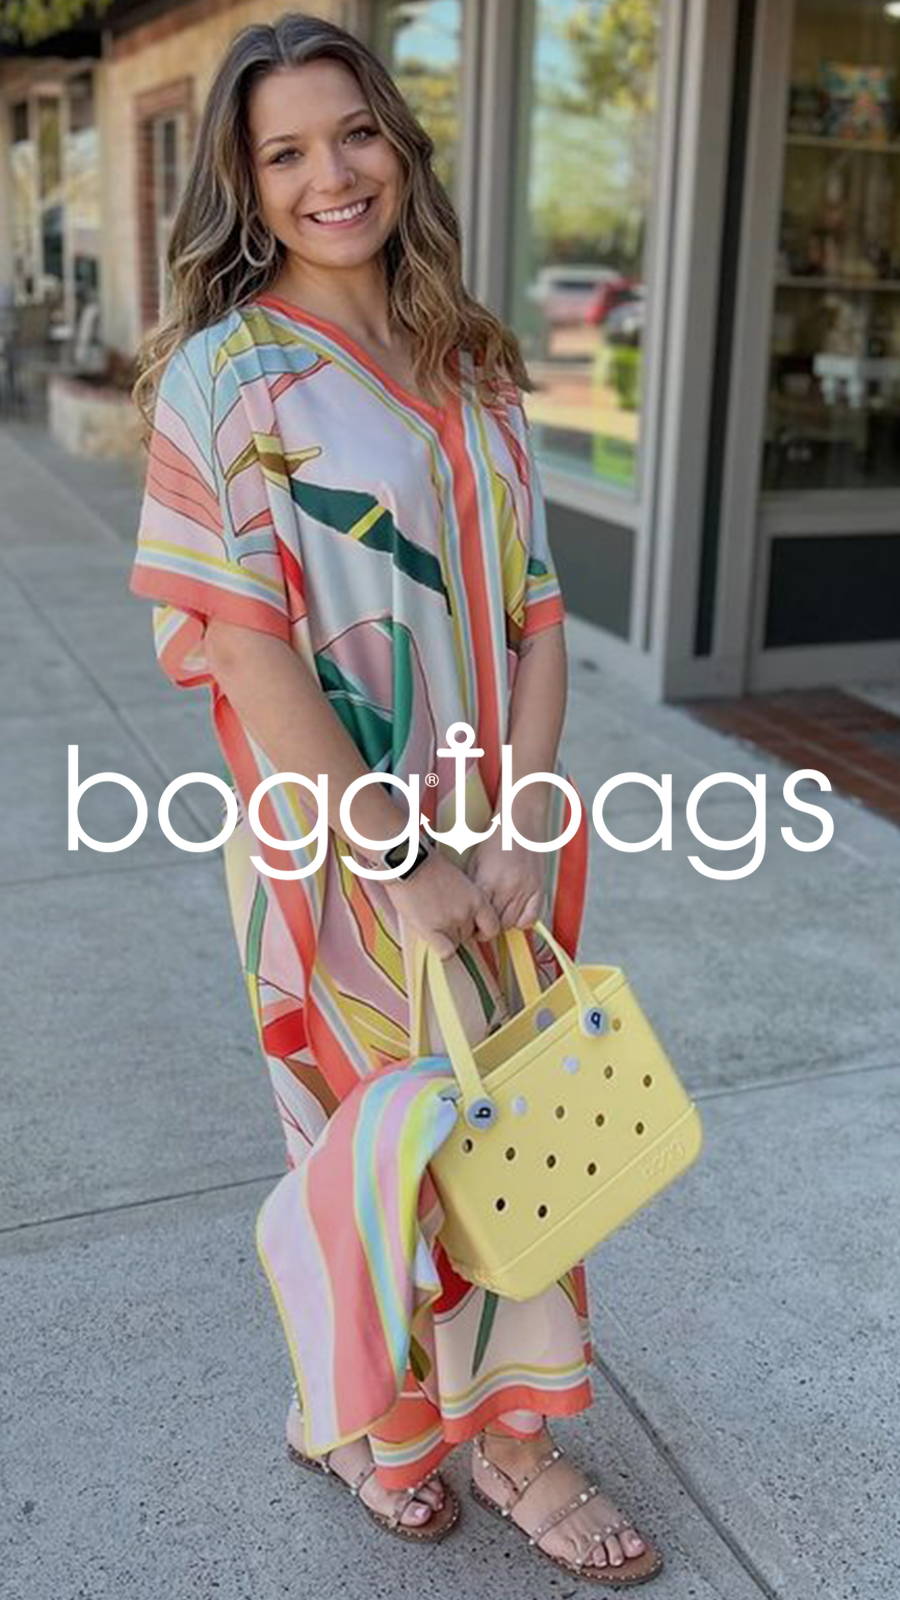 Woman holding a Bogg Bag